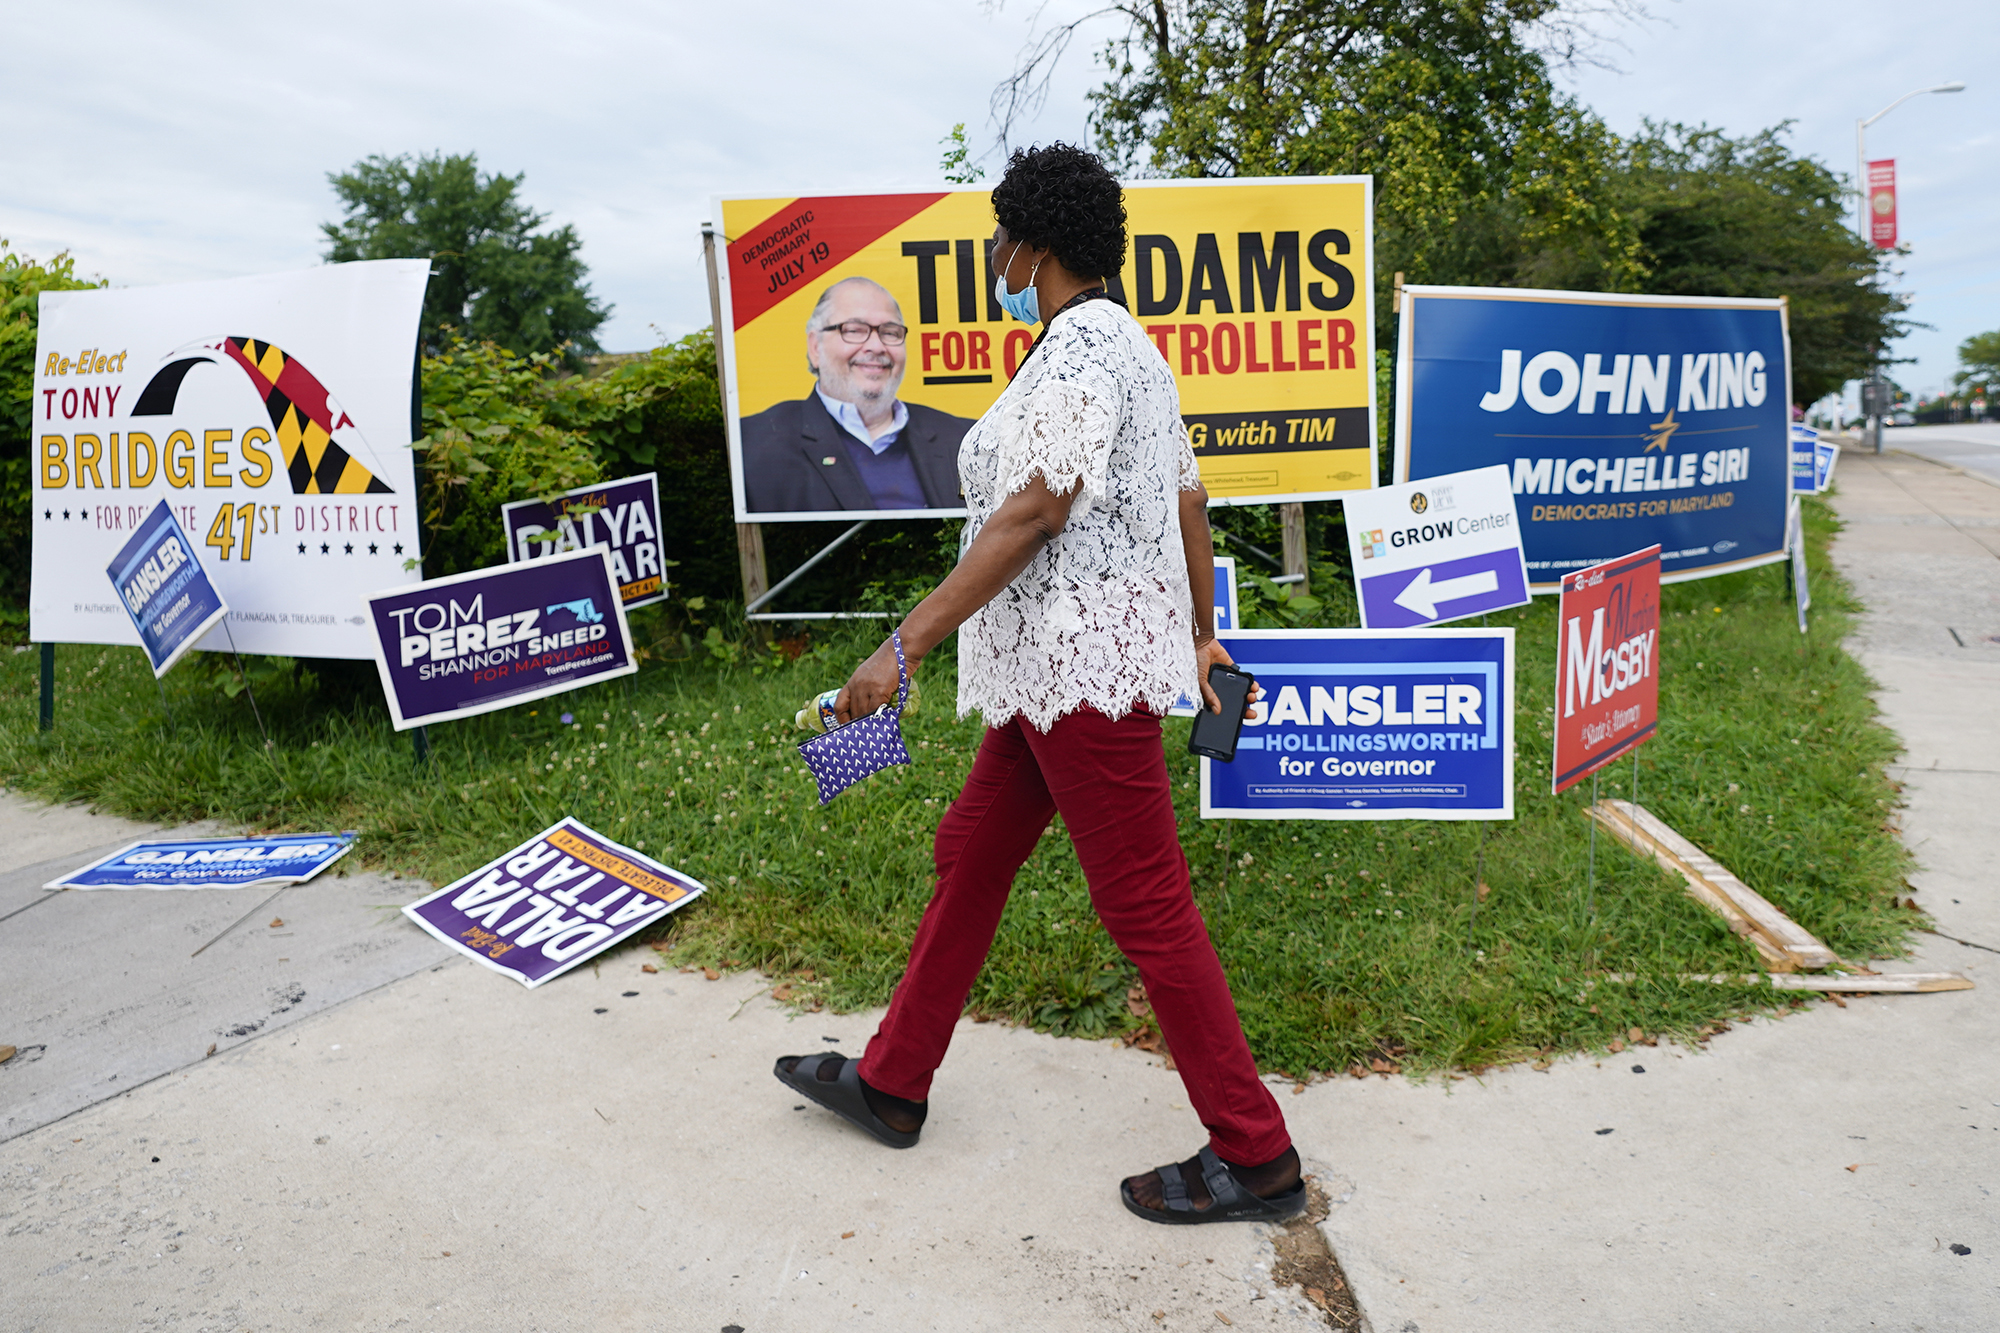 Woman wearing face mask walks along sidewalk lined with campaign signs